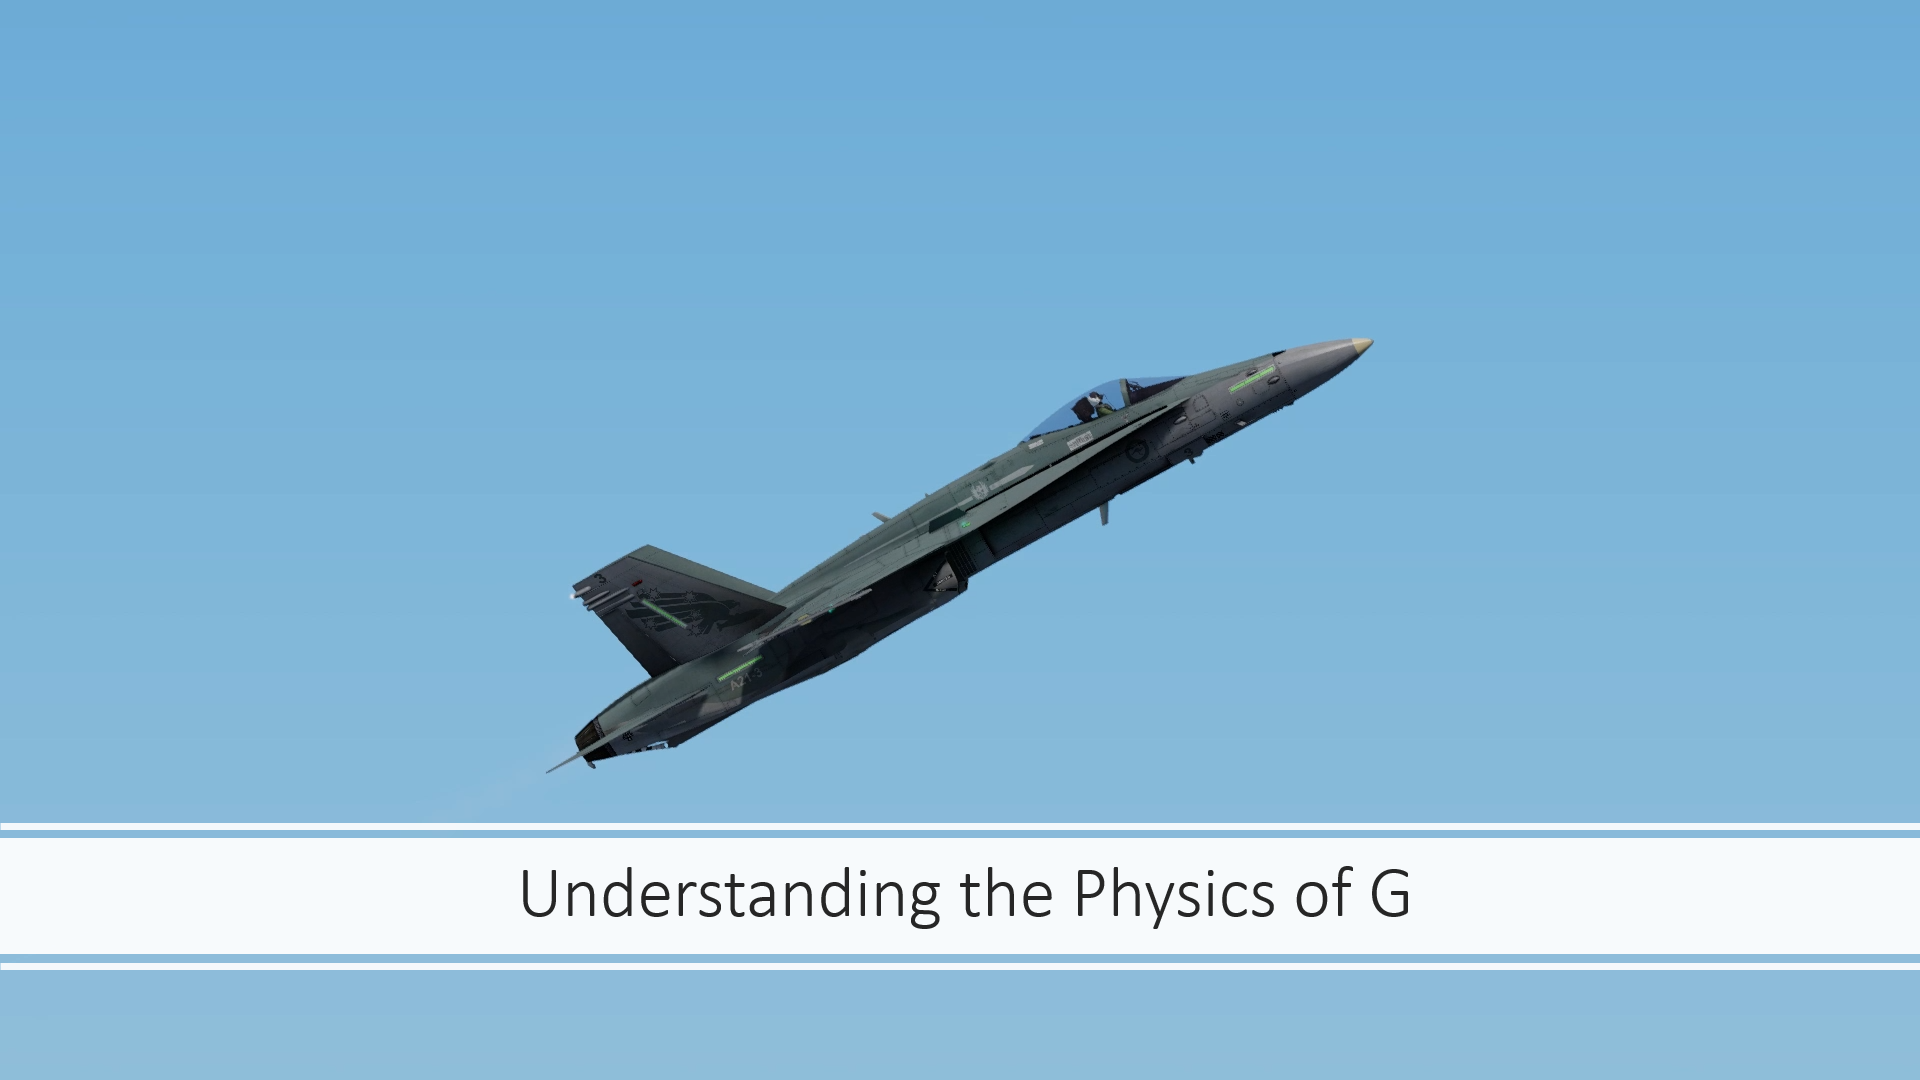 The Physics of G